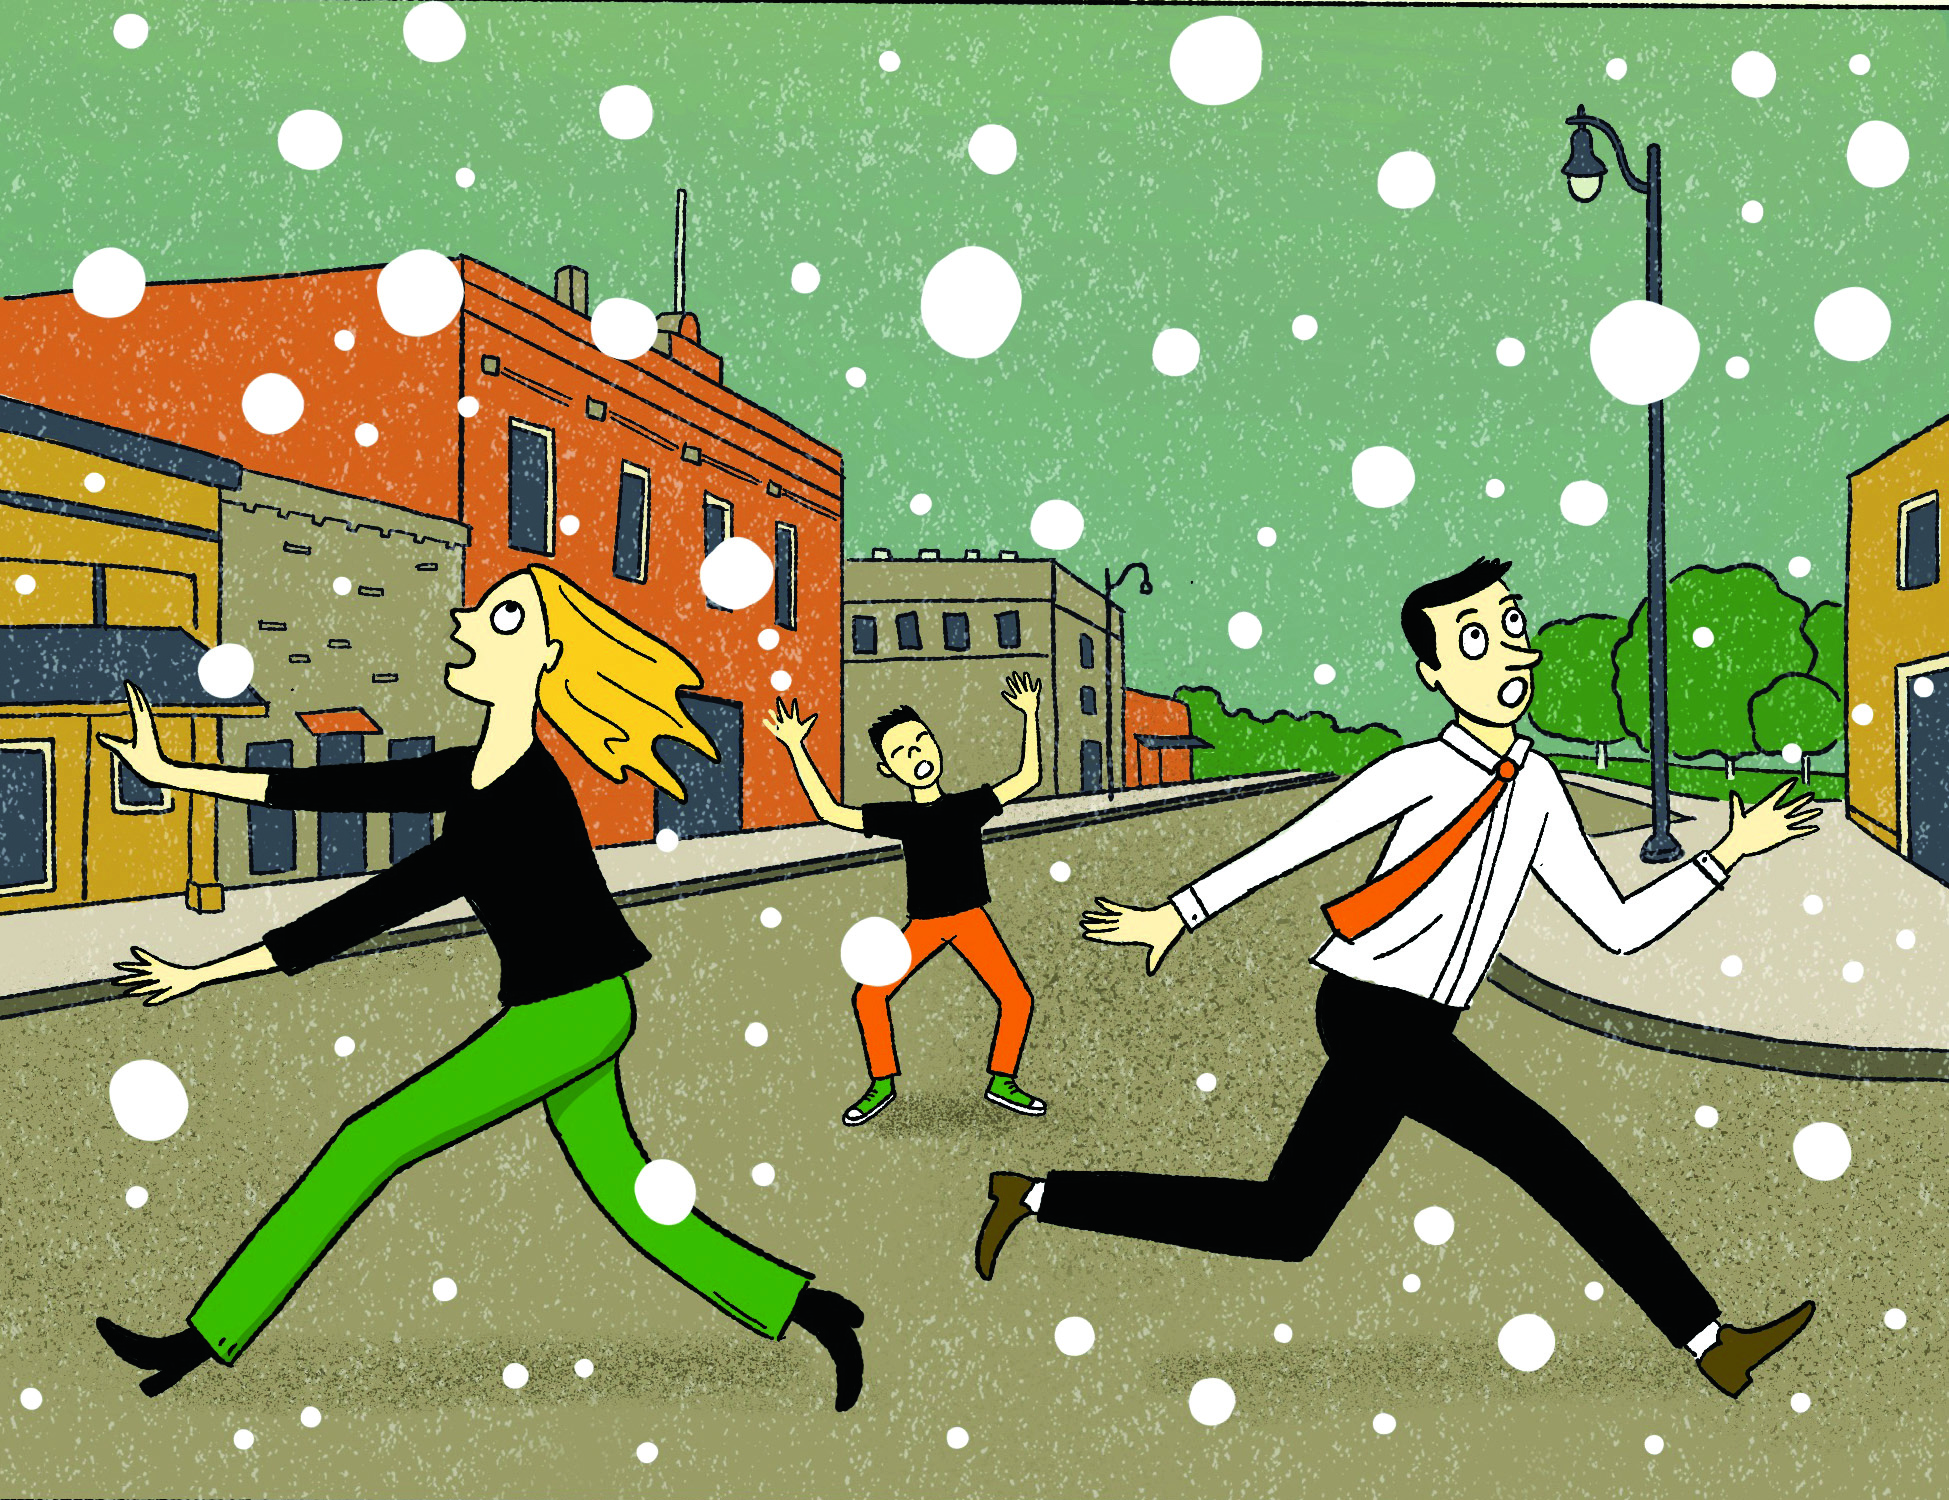 A cartoon of people in a small town scattering in a panic as massive hailstones begin raining from the sky over downtown.